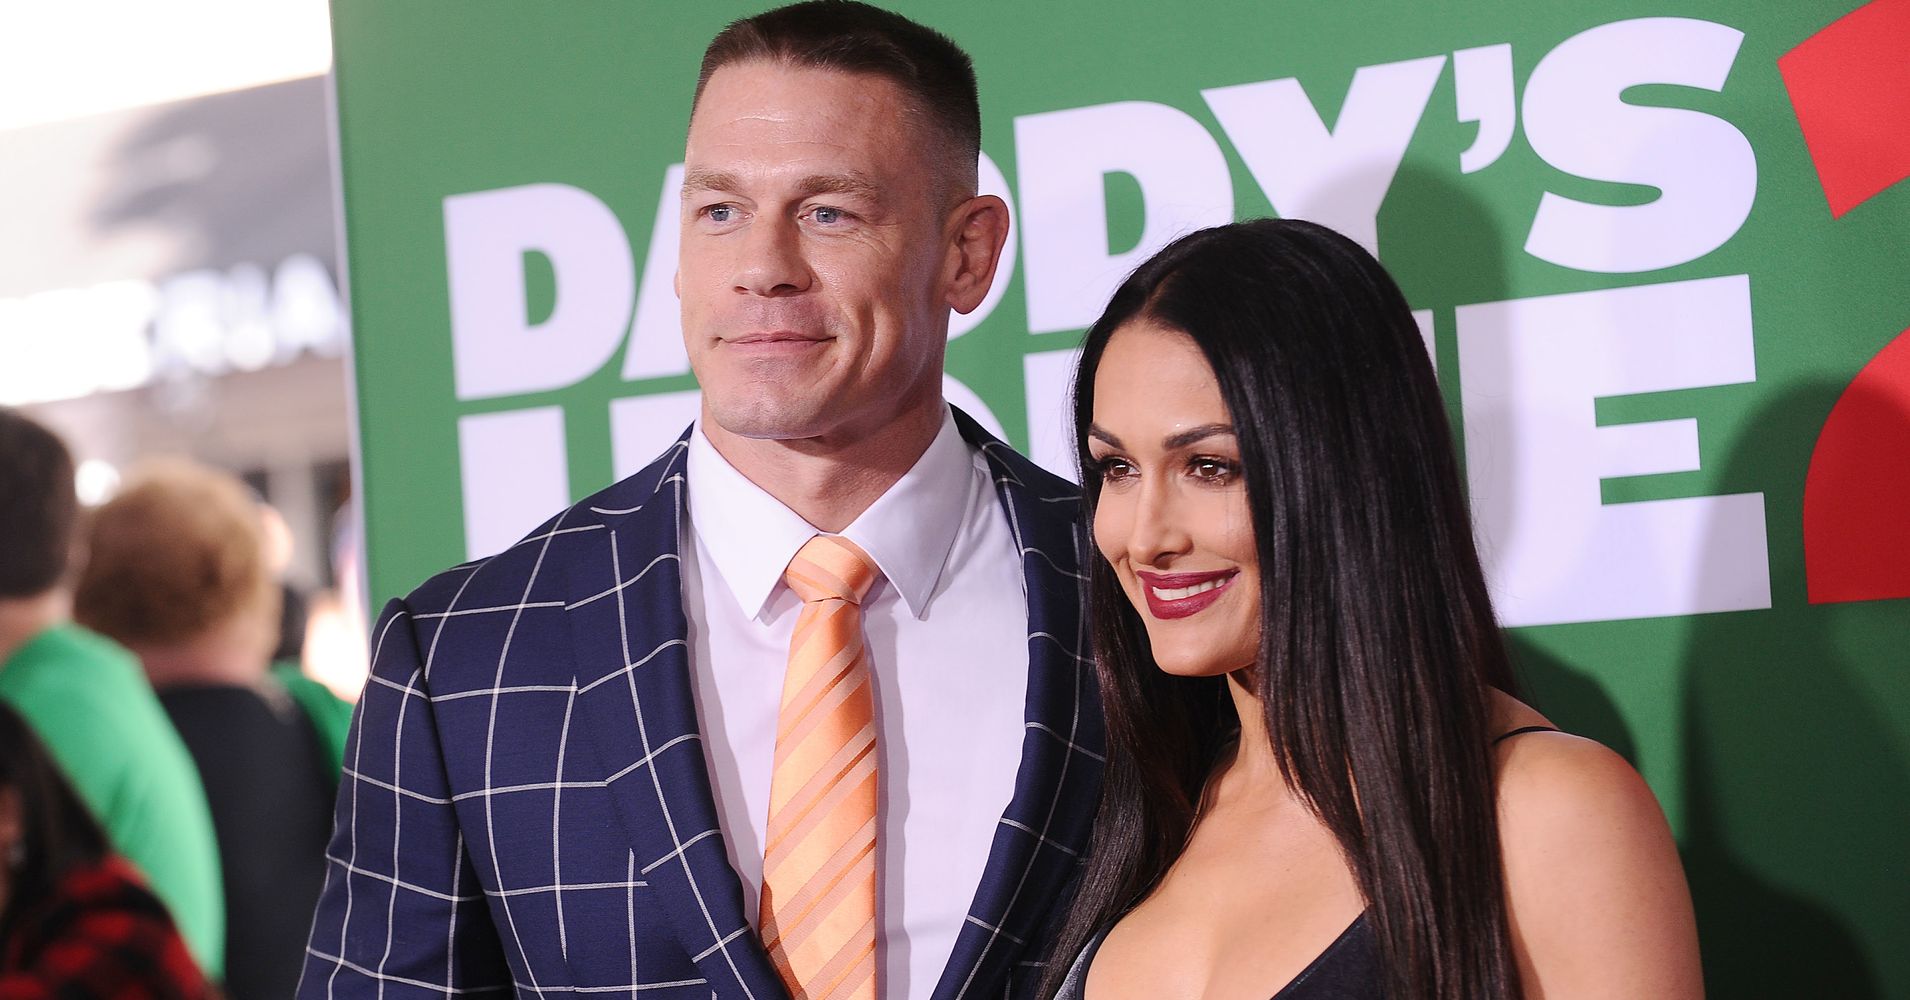 John Cena And Nikki Bella Are 'Officially' Back Together: Reports | HuffPost